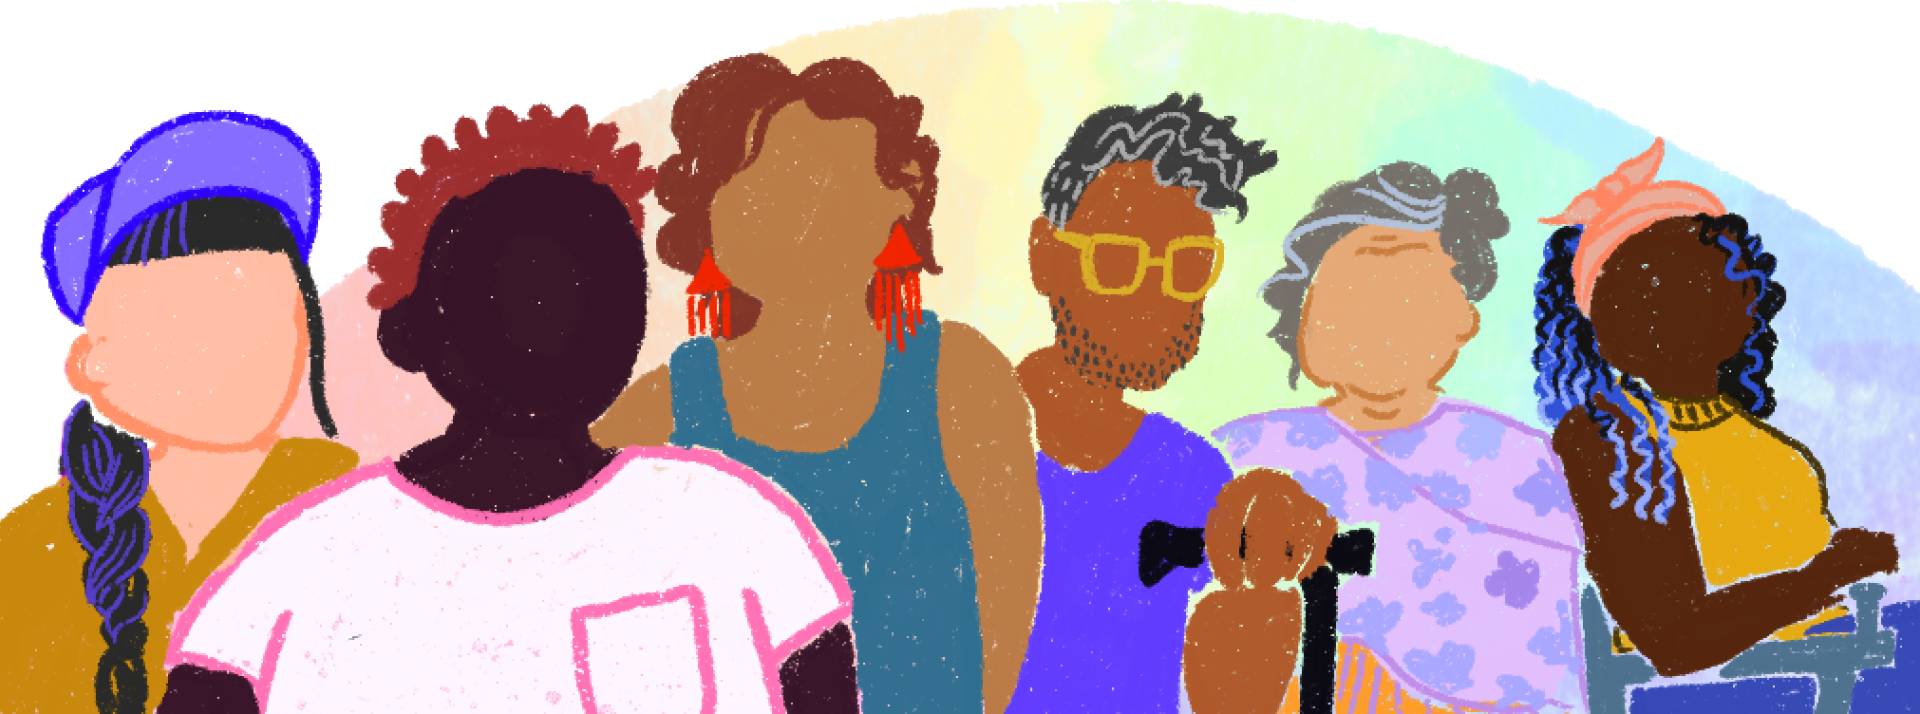 Illustration of a gender-diverse group of people in a soft pastel style.